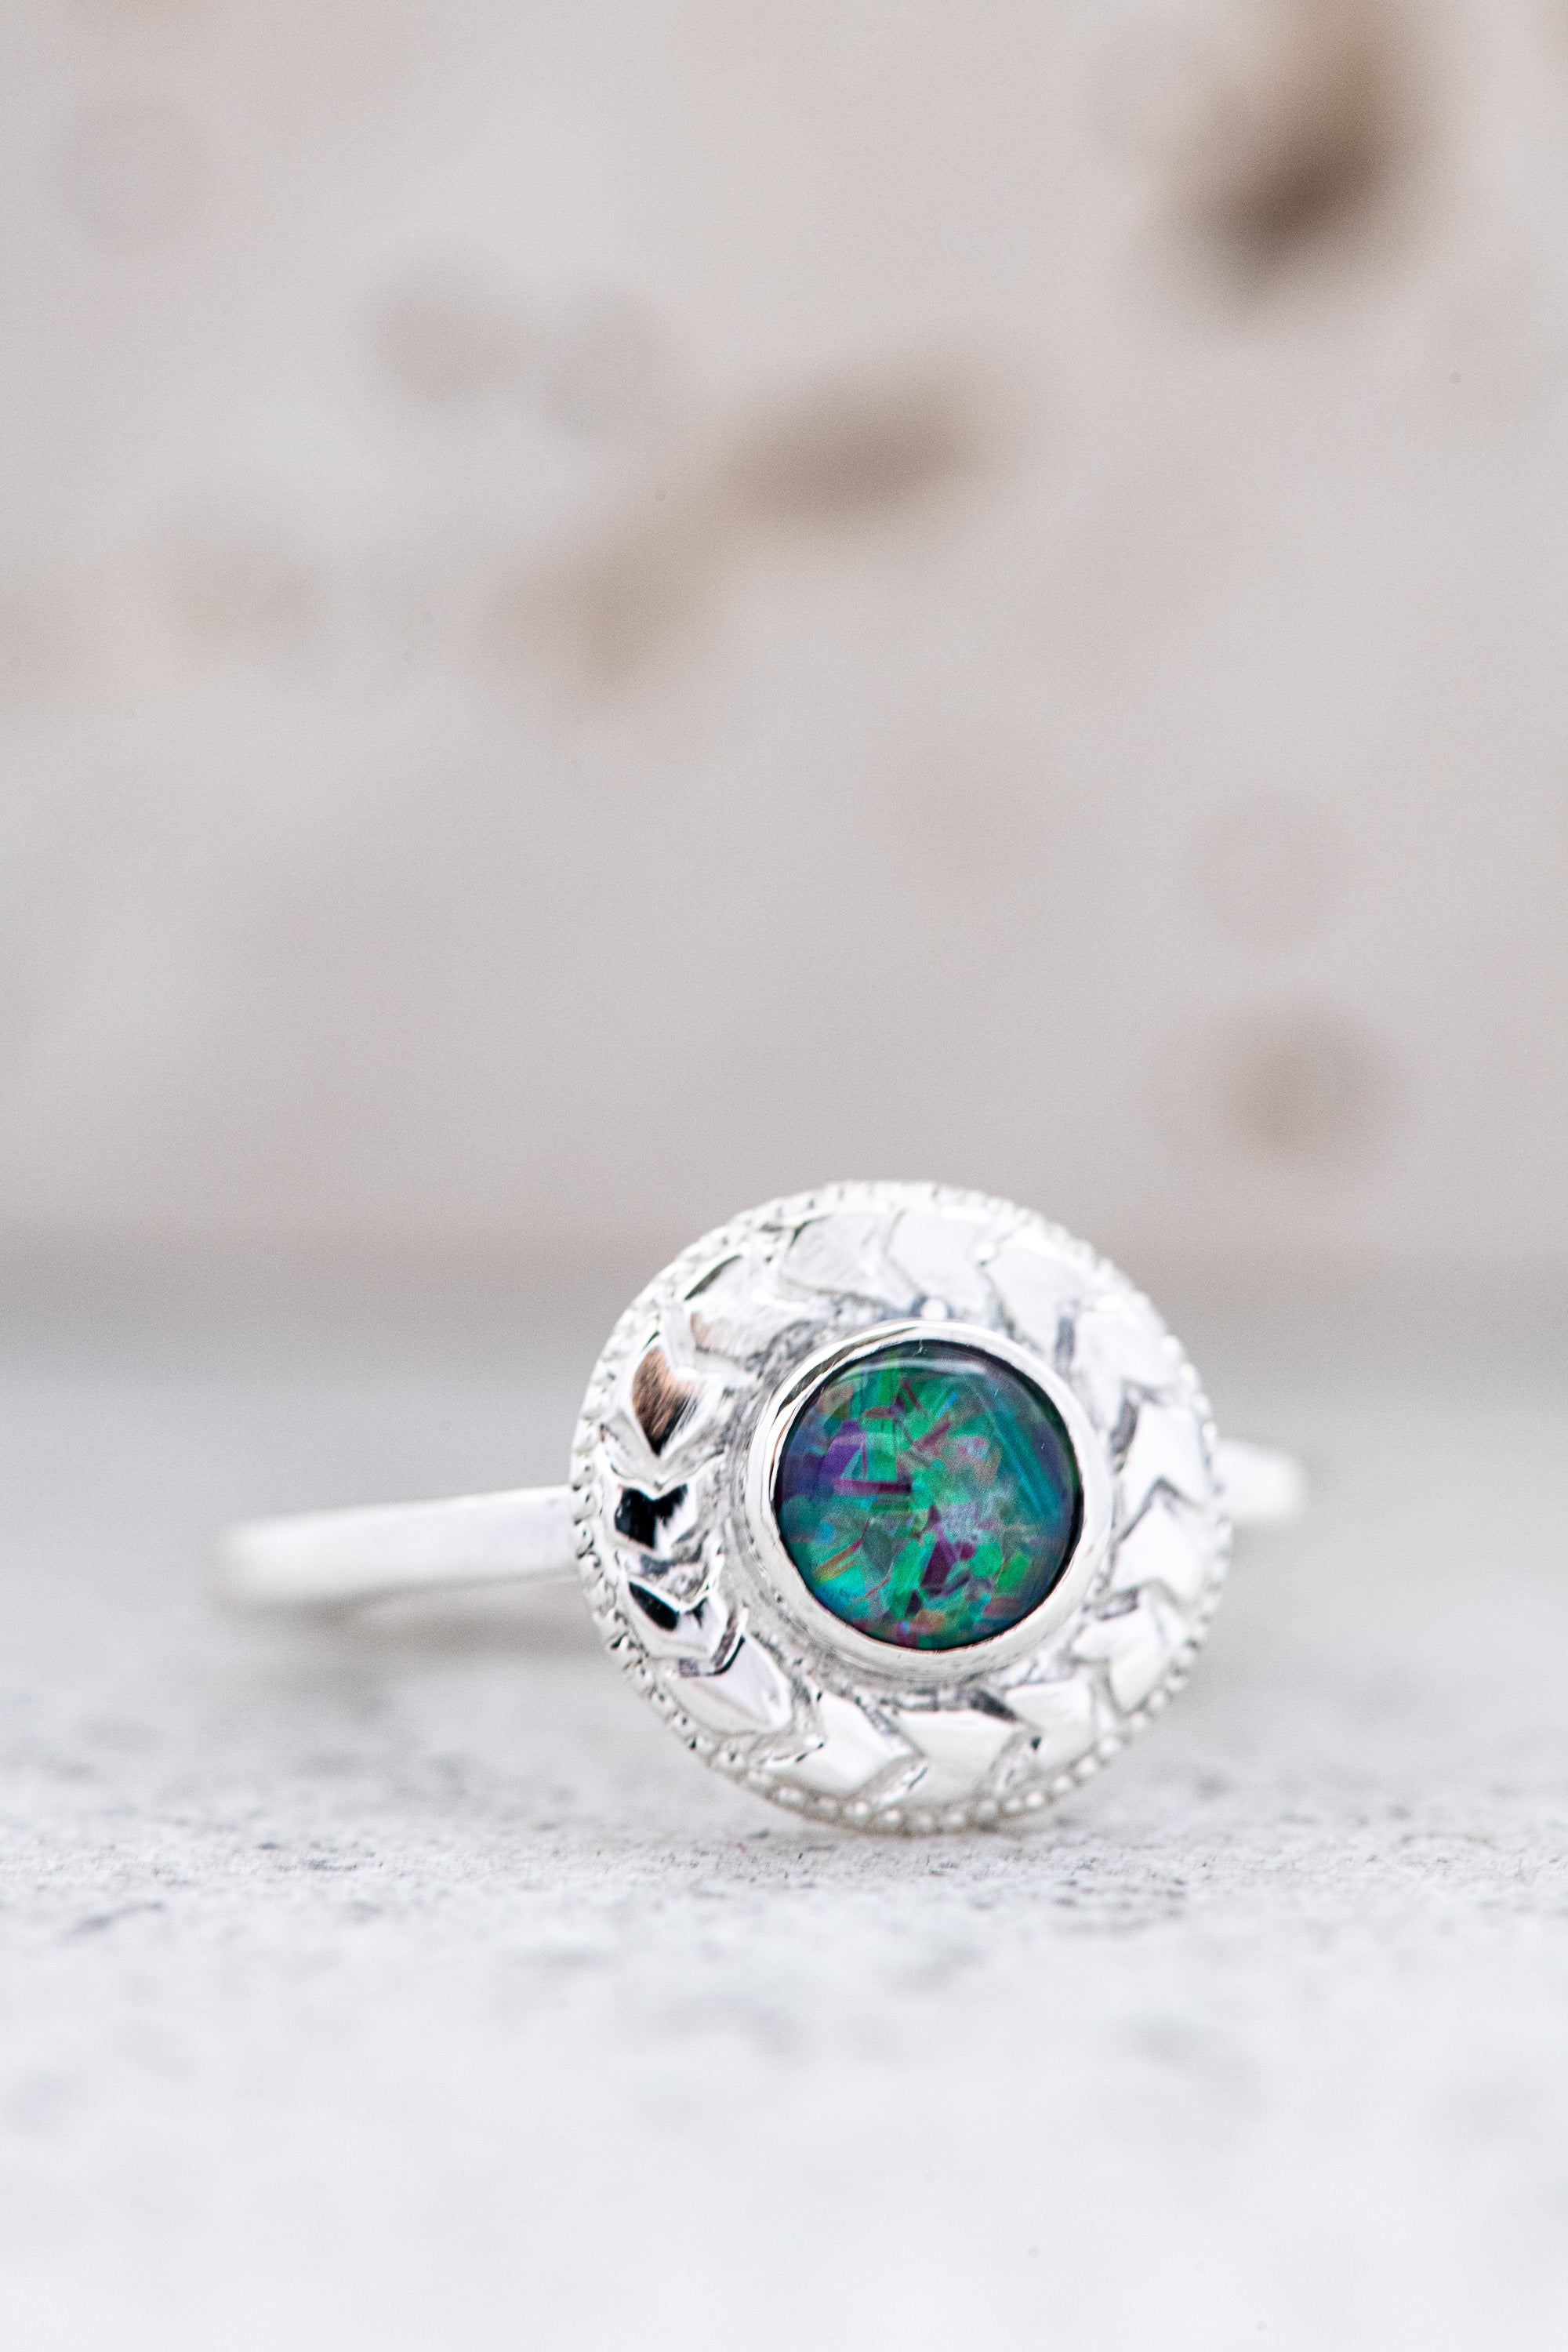 White Opal Gemstone Silver Plated Ring for Women and Men